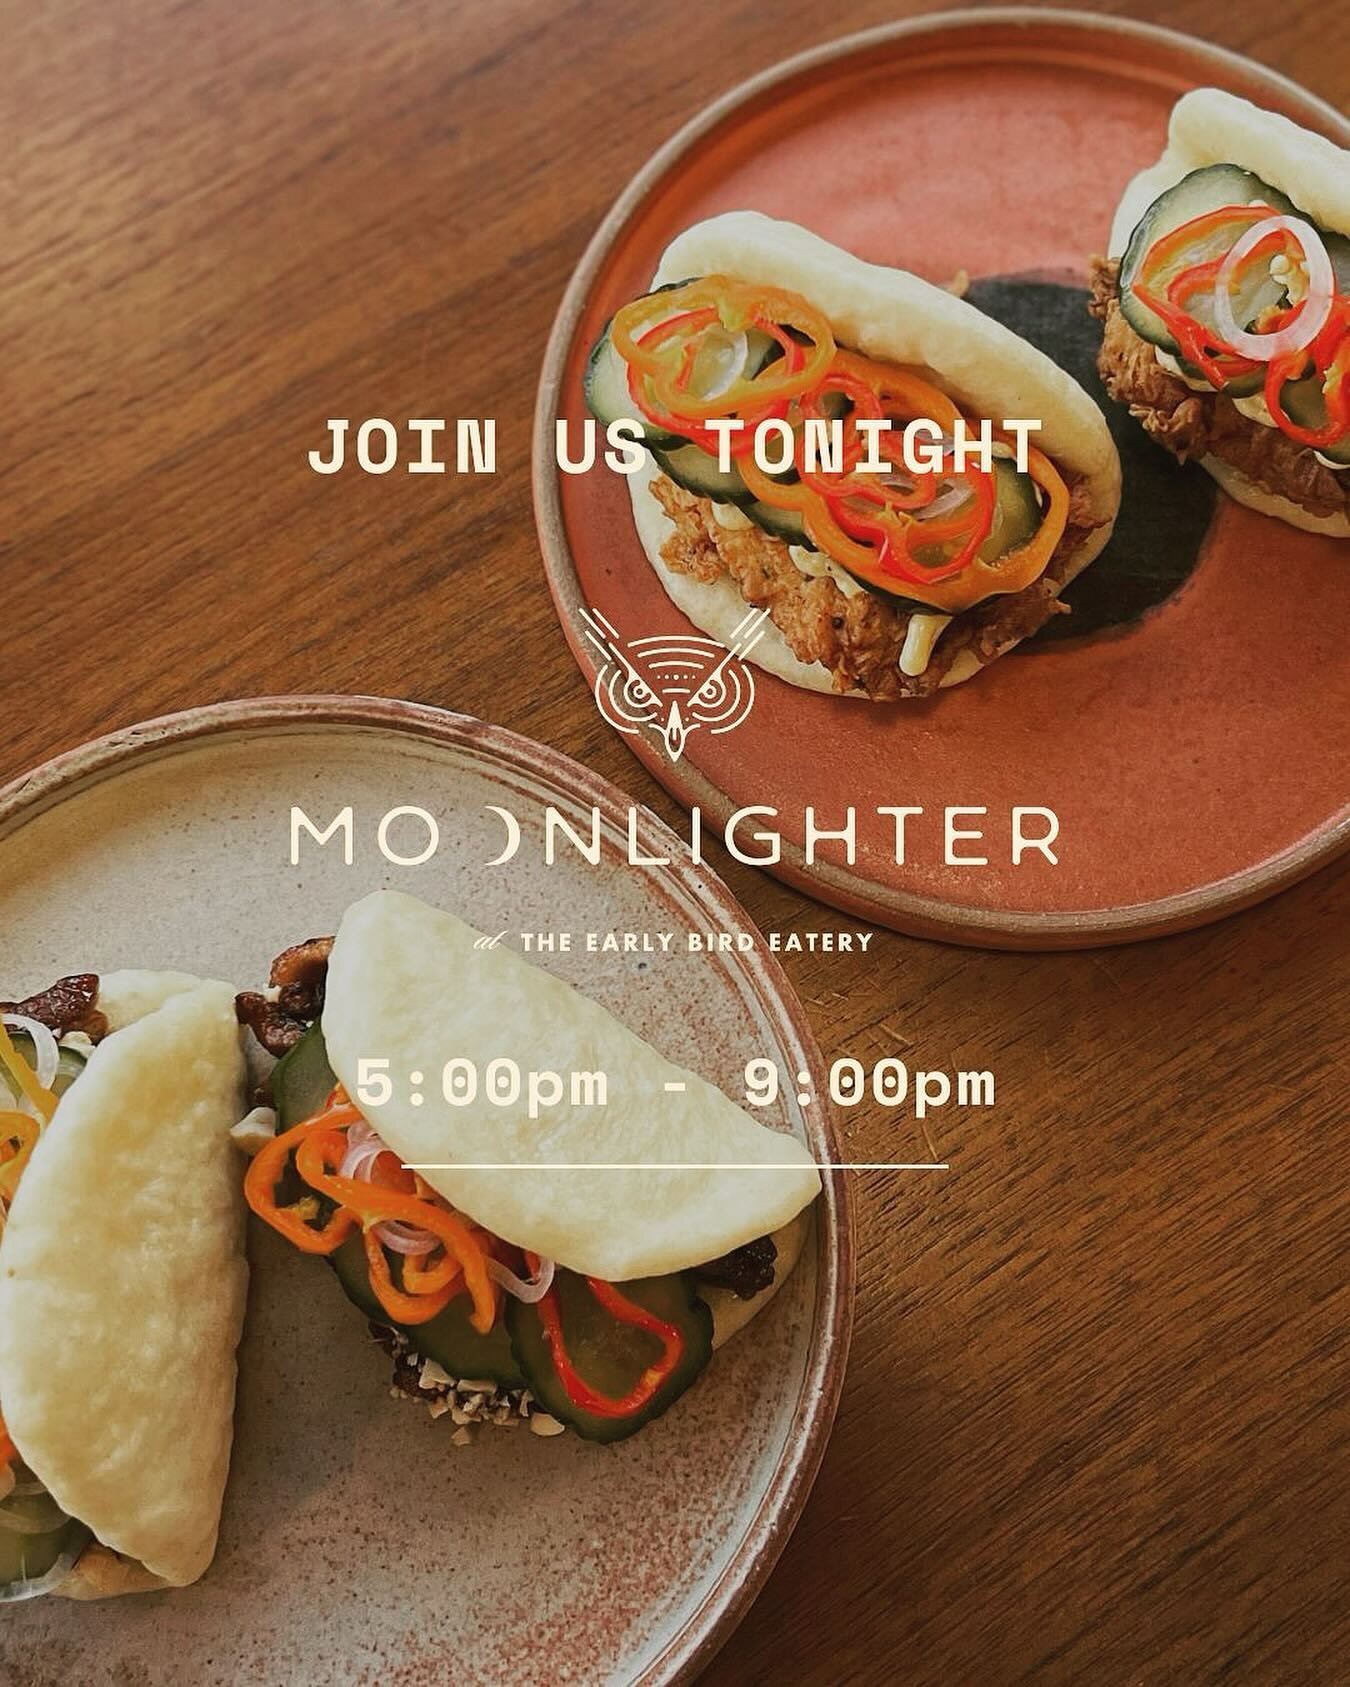 It&rsquo;s (almost) the weekend, but the good stuff starts tonight. Open 5pm-9pm, dine-in or carry-out. 

www.theearlybirdeatery.com/moonlighter

#goodfood #comfortfood #elevatedclassics #nightmoves #moonlighter #dtsouthbend